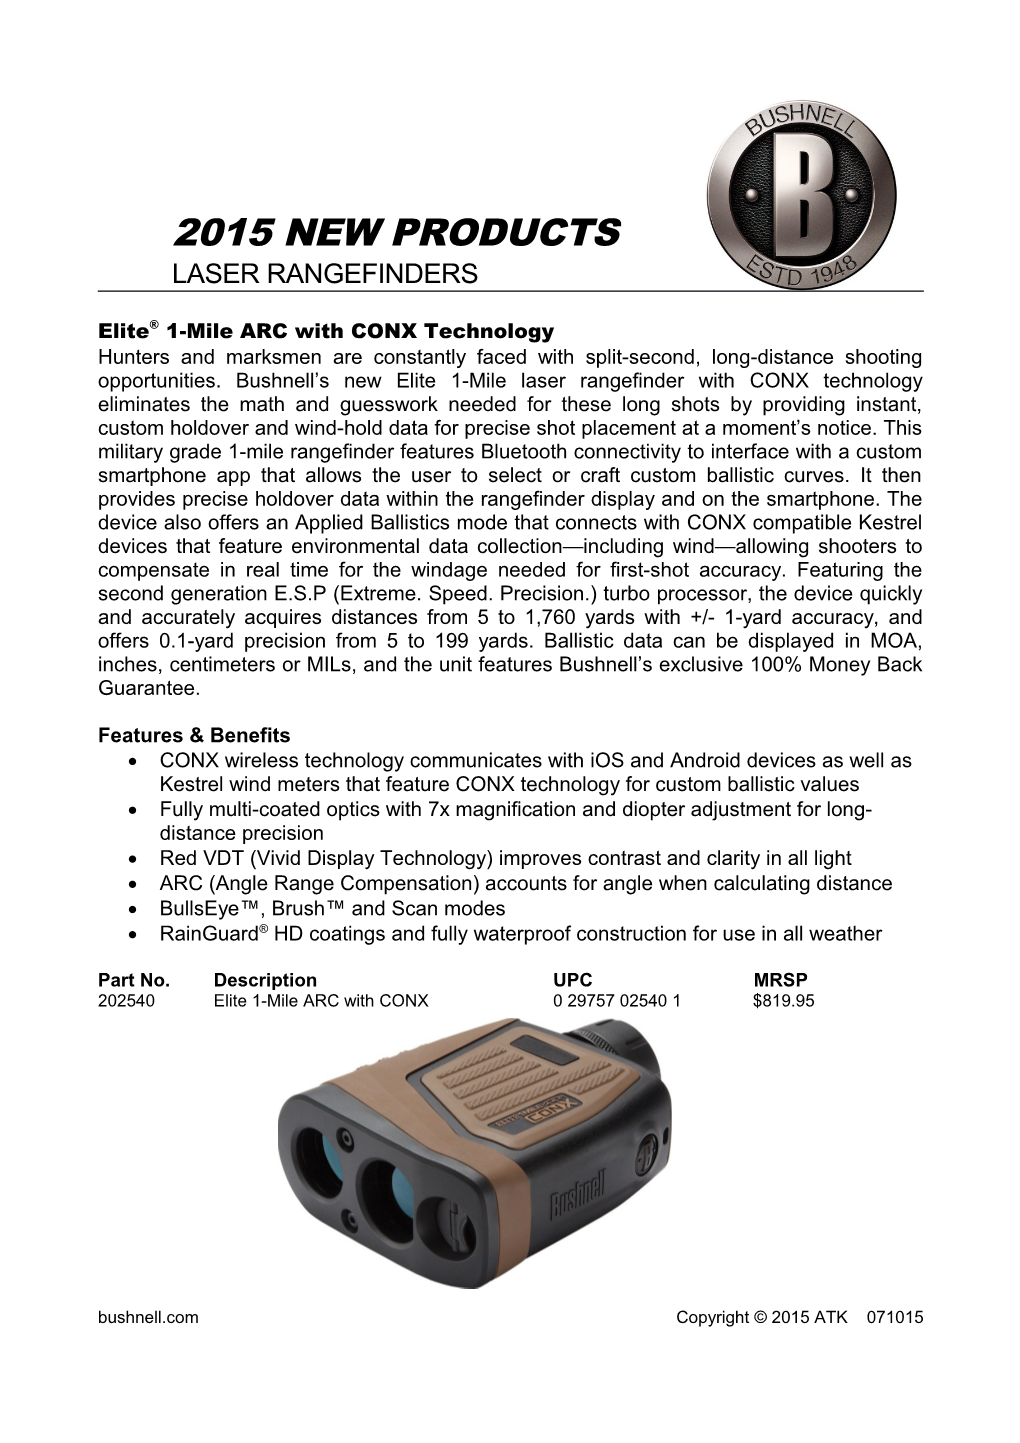 2015 New Products Laser Rangefinders